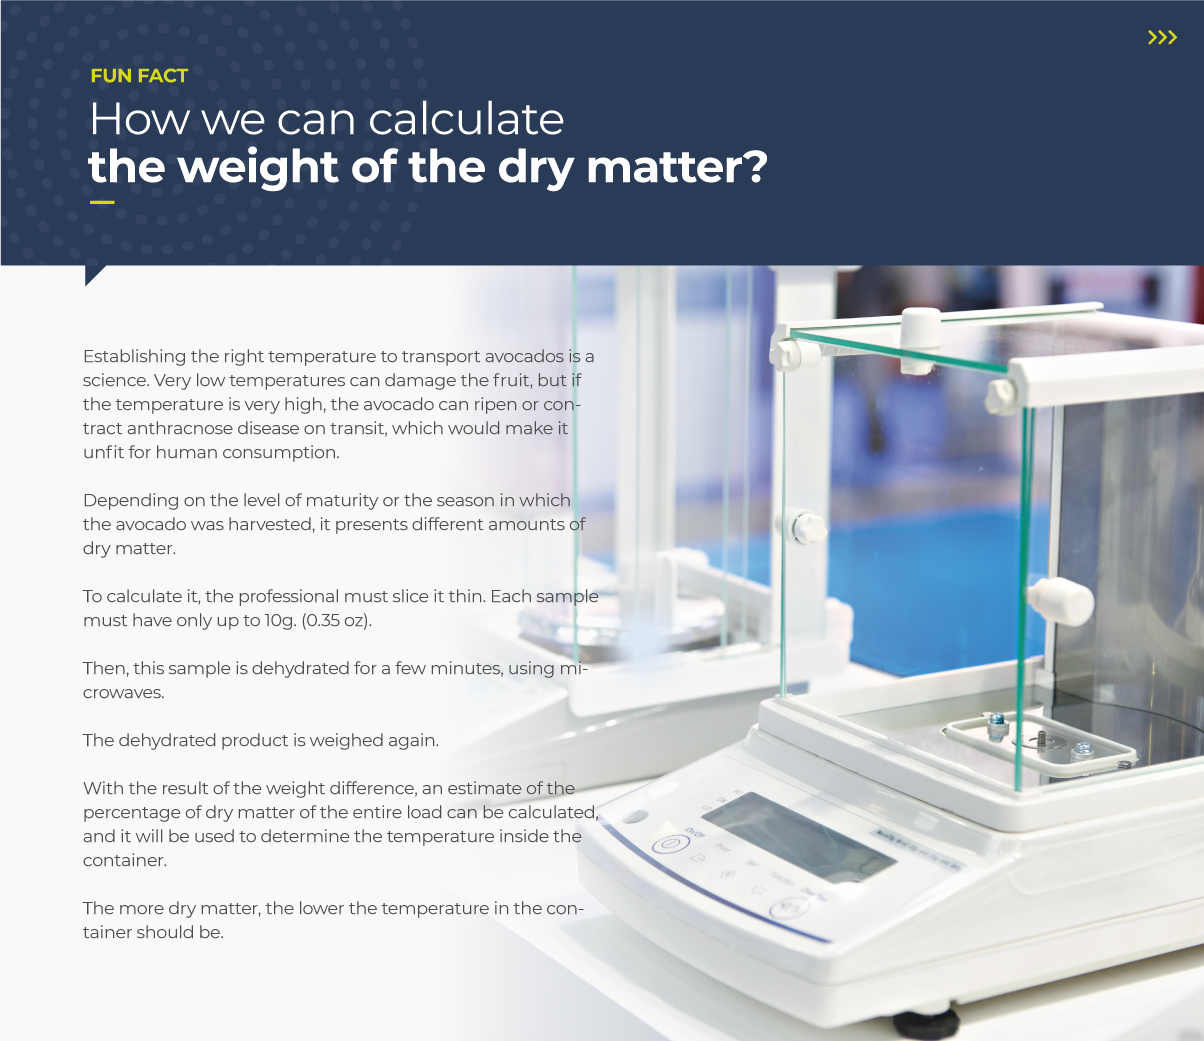 How can we calculate the weight of the dry matter?